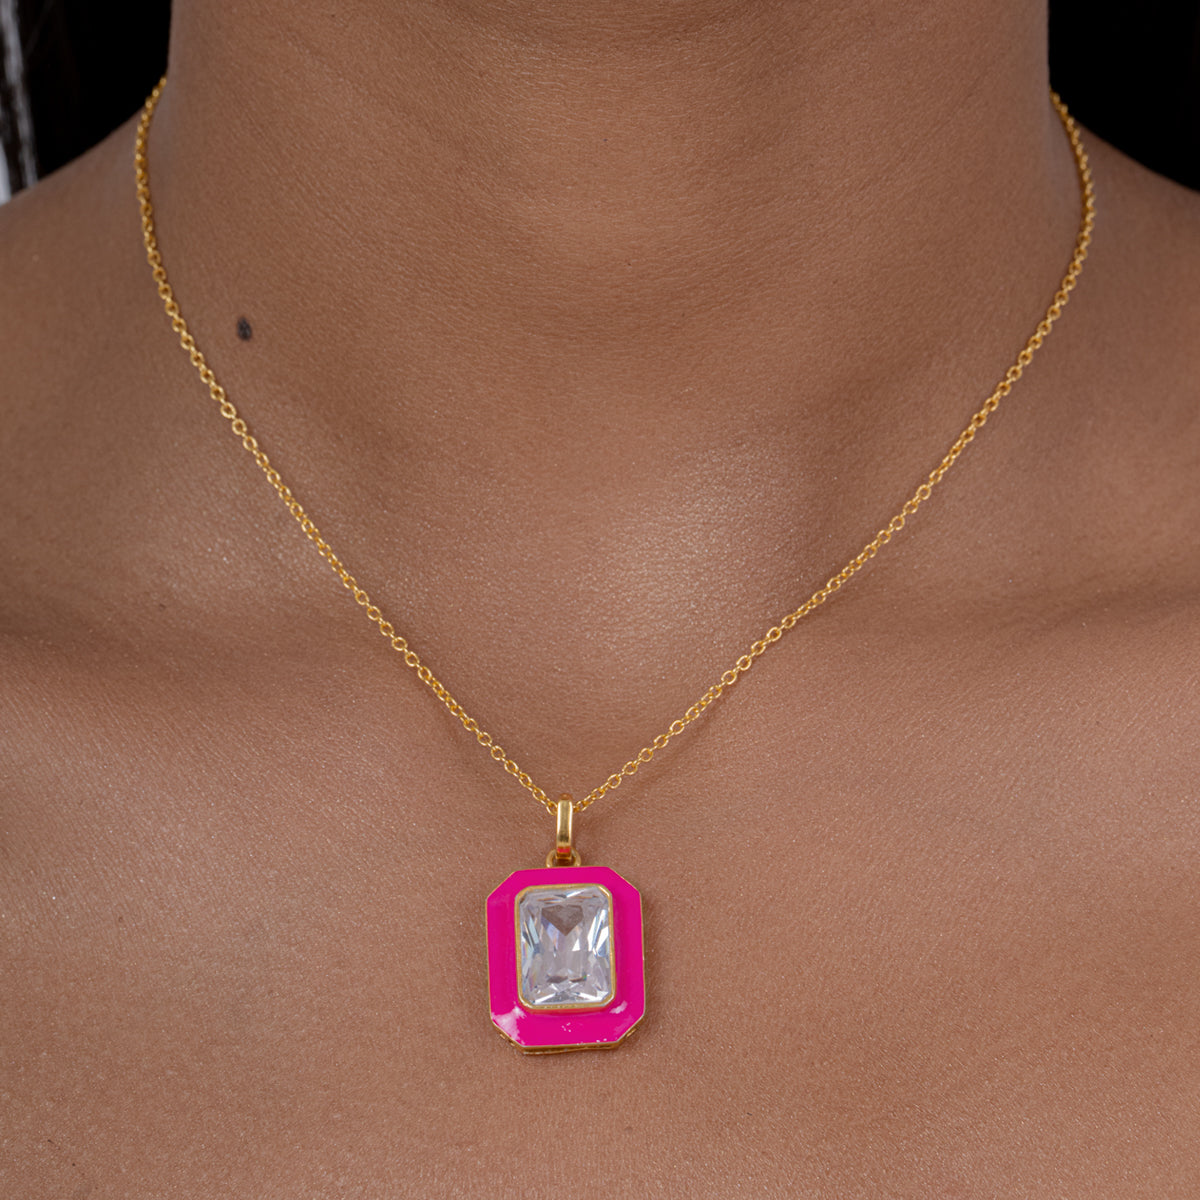 Hot Pink Tone Alma Necklace